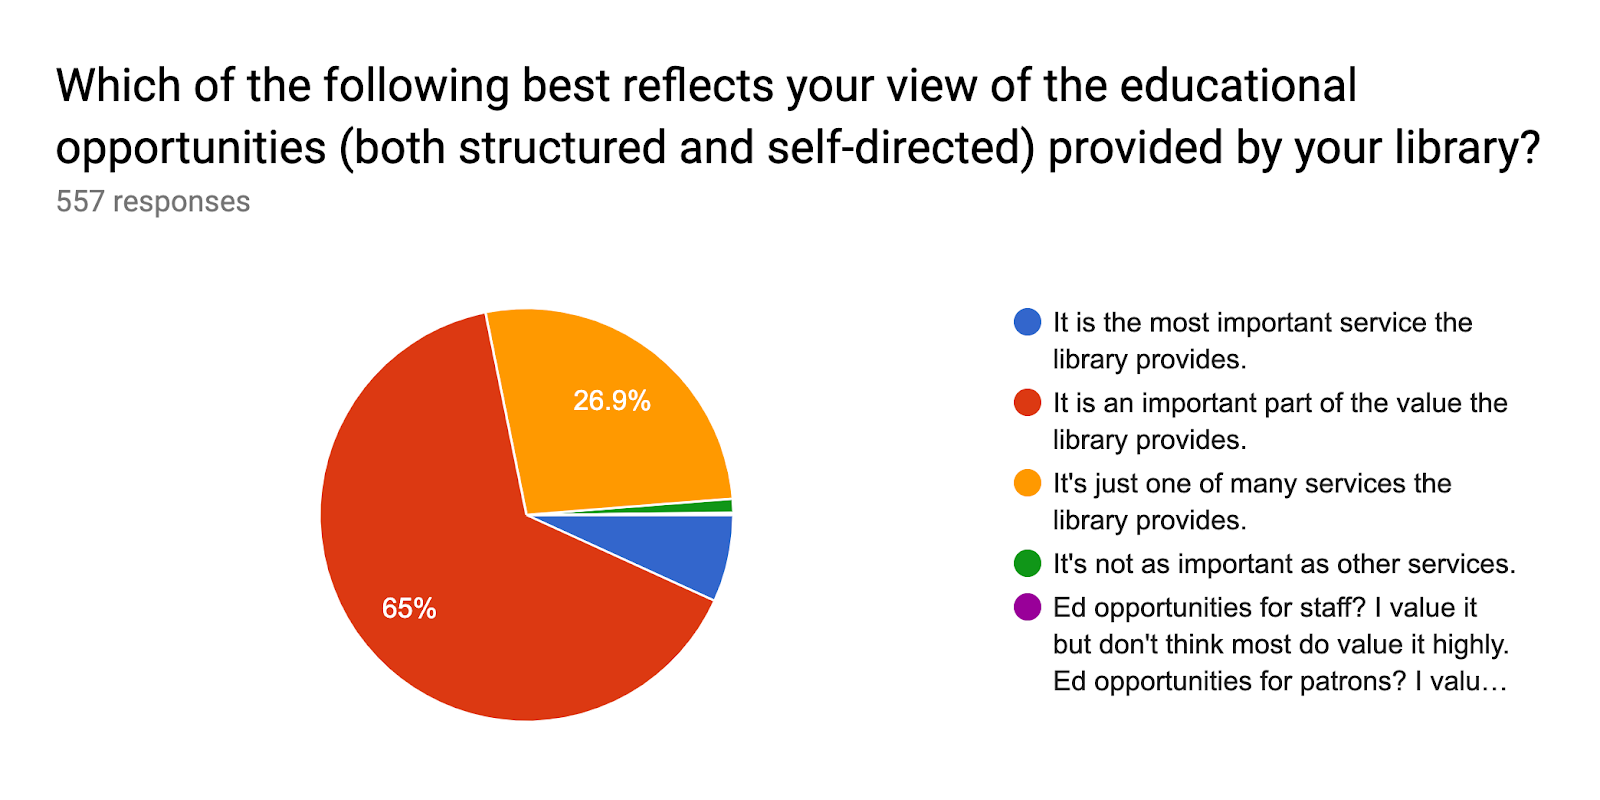 Forms response chart. Question title: Which of the following best reflects your view of the educational opportunities (both structured and self-directed) provided by your library?. Number of responses: 557 responses.